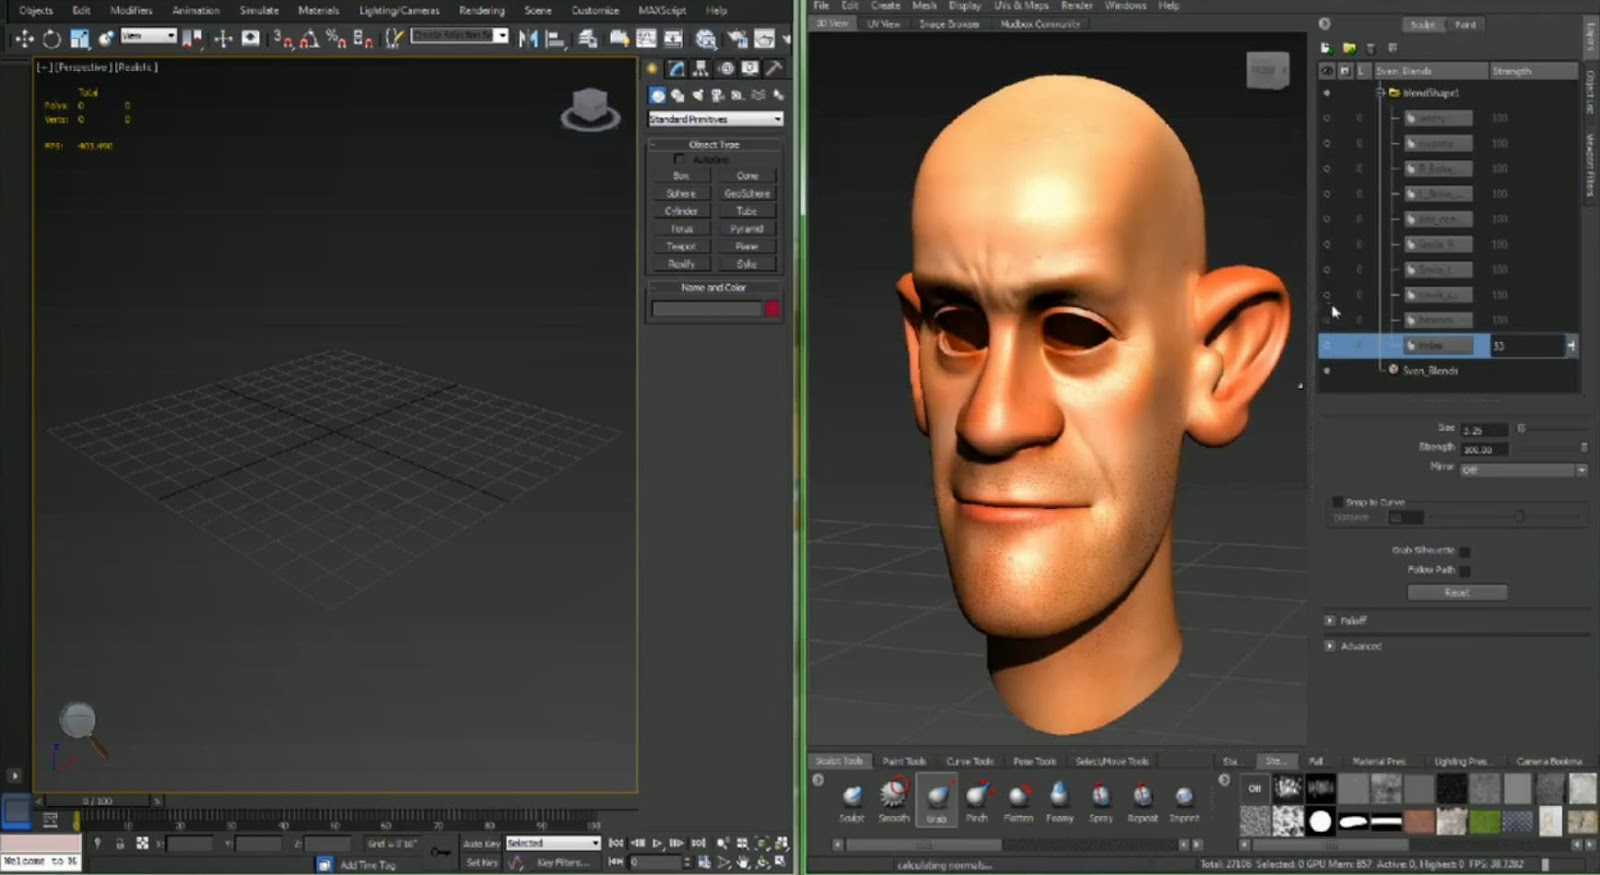 autodesk 3ds max 2015 requirements